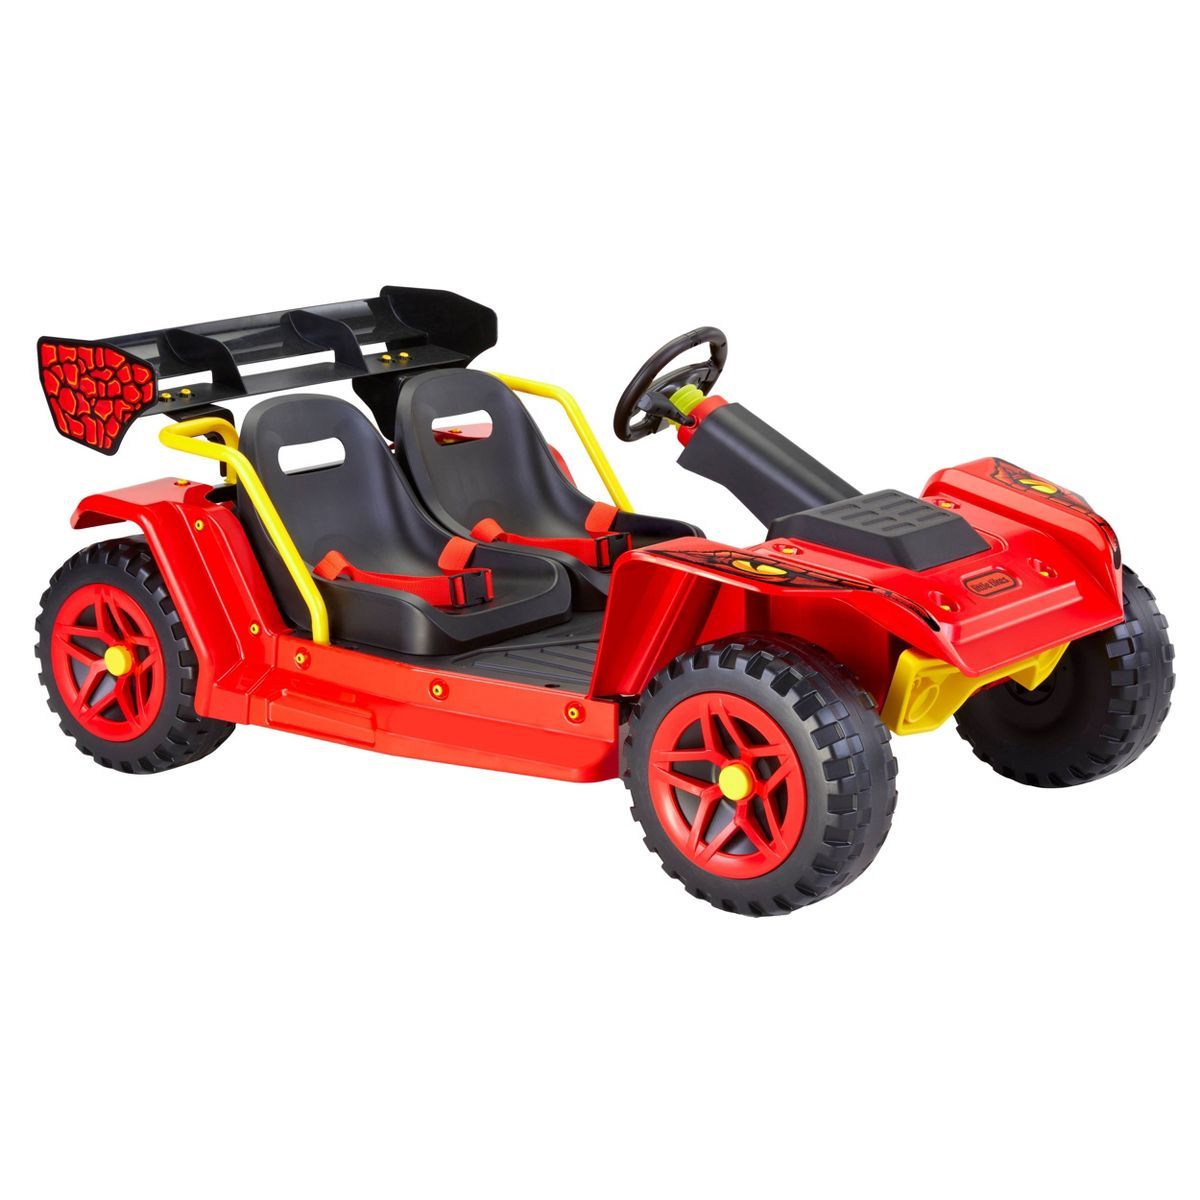 Little Tikes 12V Dino Dune Buggy Powered Ride-On - Red/Black | Target